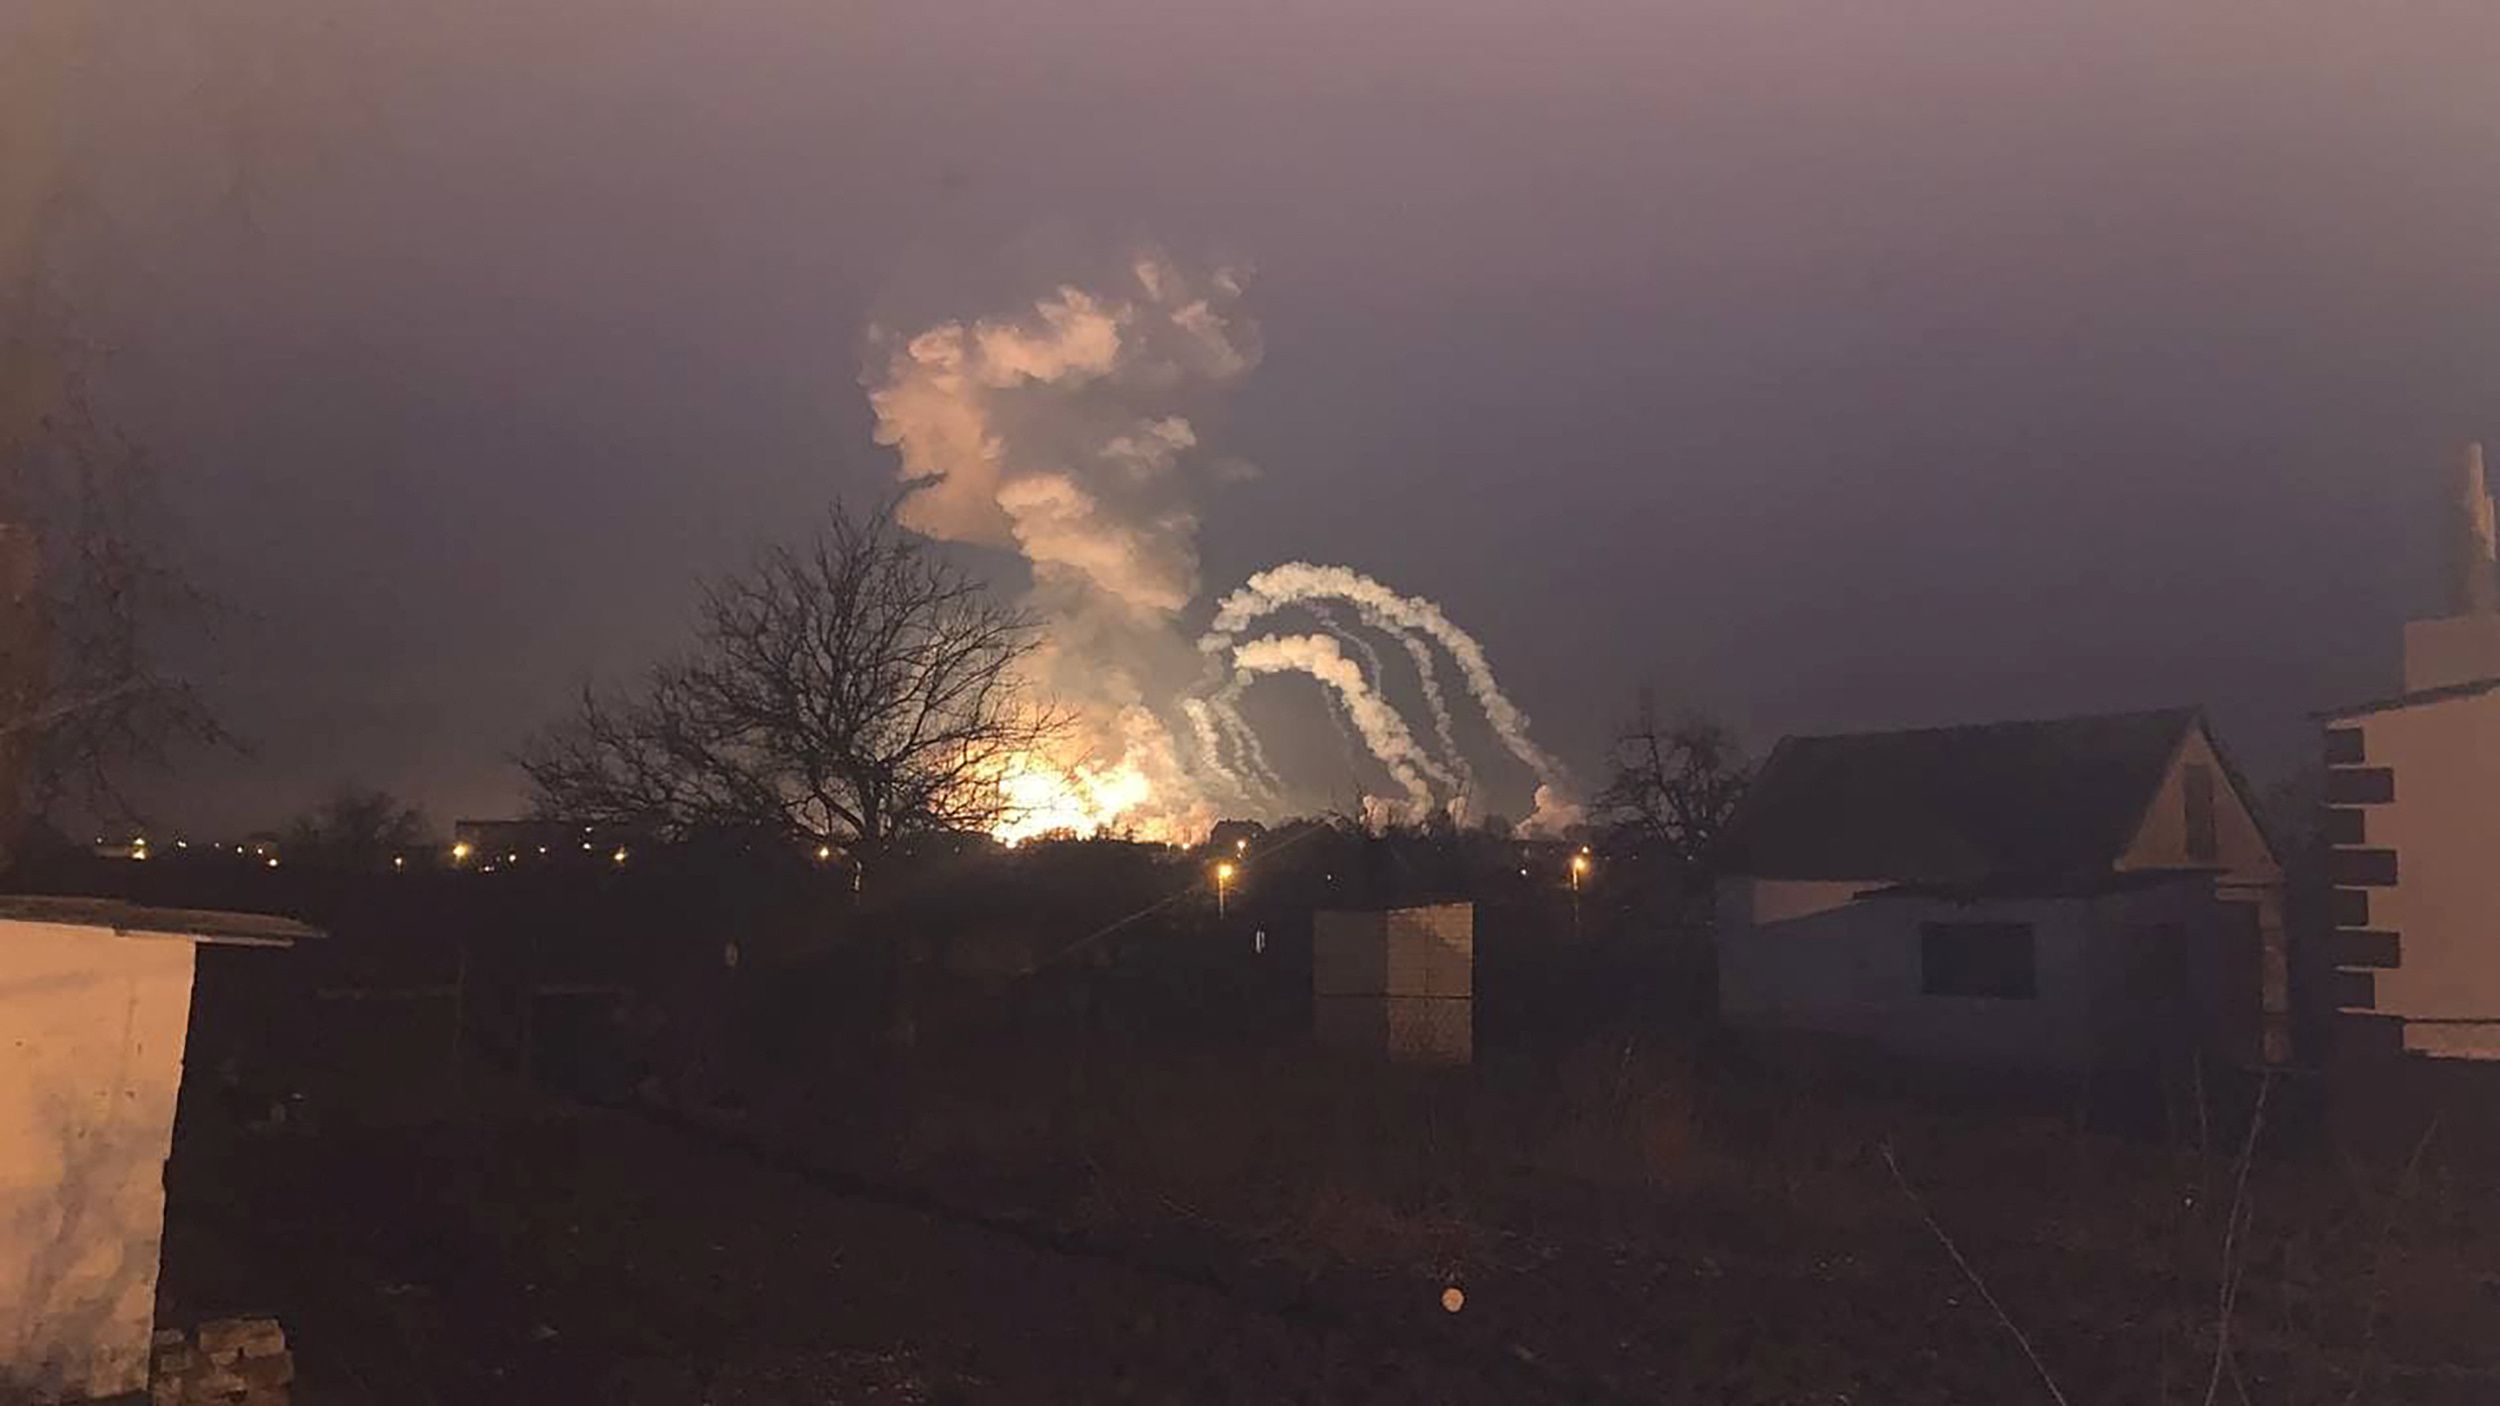 View of an explosion, after Russian President Vladimir Putin authorised a military operation in eastern Ukraine, near Dnipro, Ukraine February 24, 2022 in this image obtained by REUTERS ATTENTION EDITORS - THIS IMAGE HAS BEEN SUPPLIED BY A THIRD PARTY. NO RESALES. NO ARCHIVES